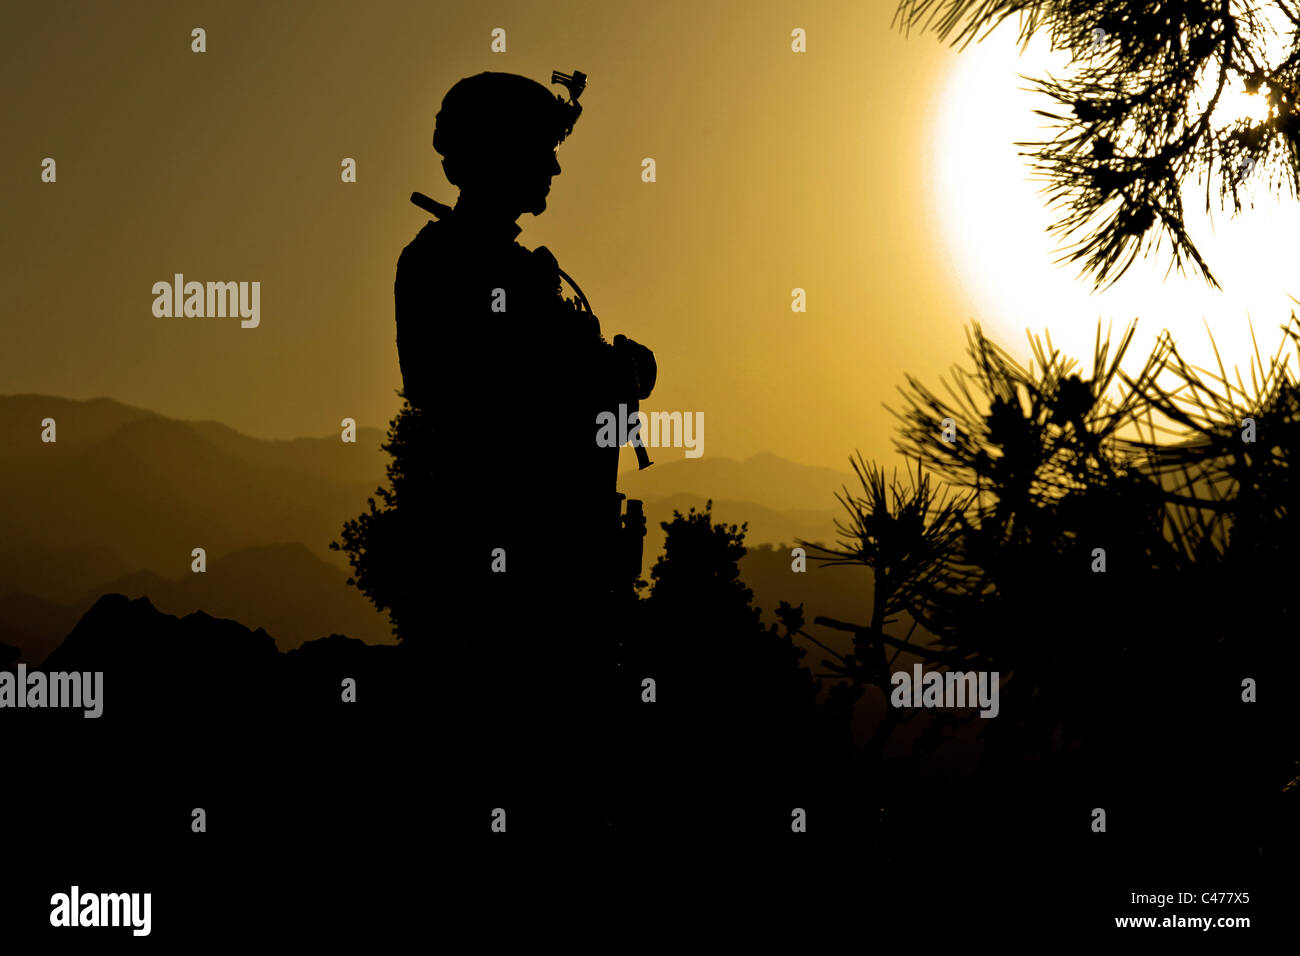 U.S. Army Sgt. Richard Toon is silhouetted against the setting sun during patrol along the Afghan Pakistan border Stock Photo